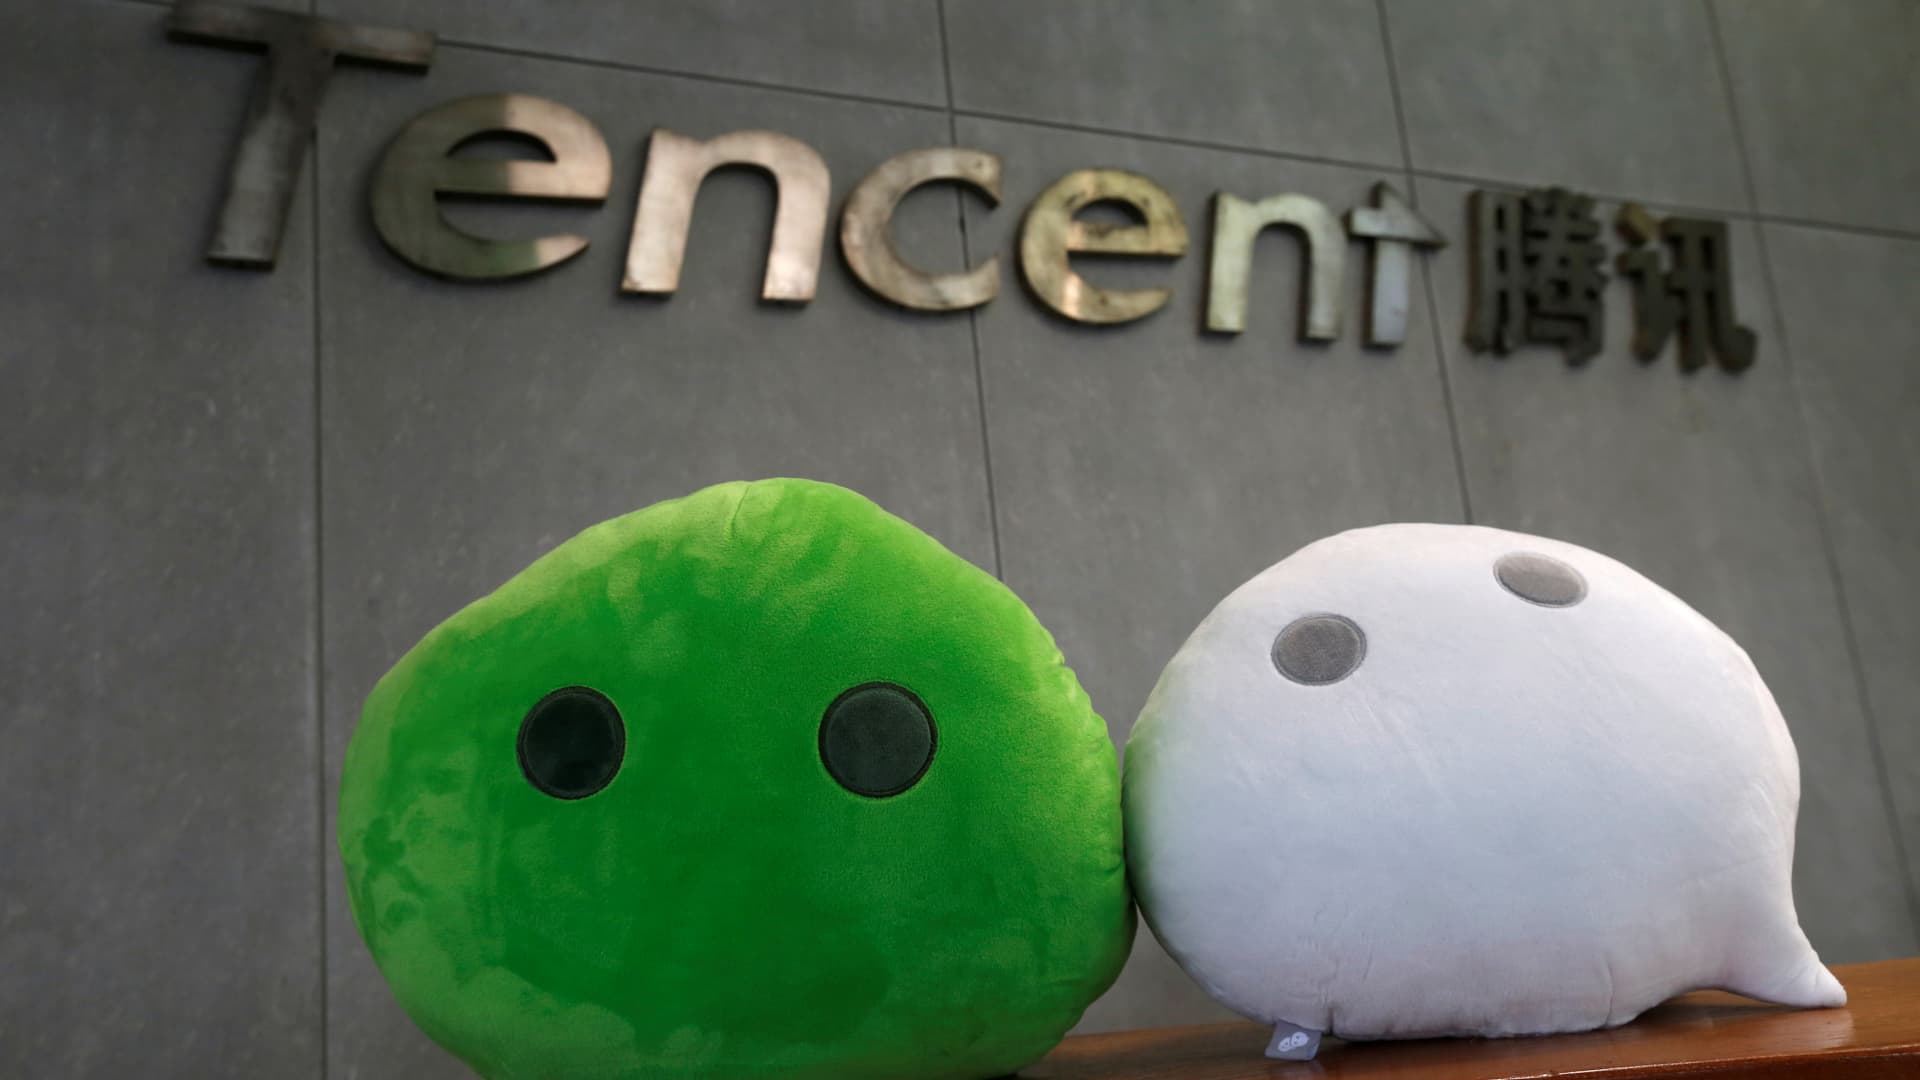 China’s Tencent bets on cloud computing growth abroad as its core video games business takes a beating